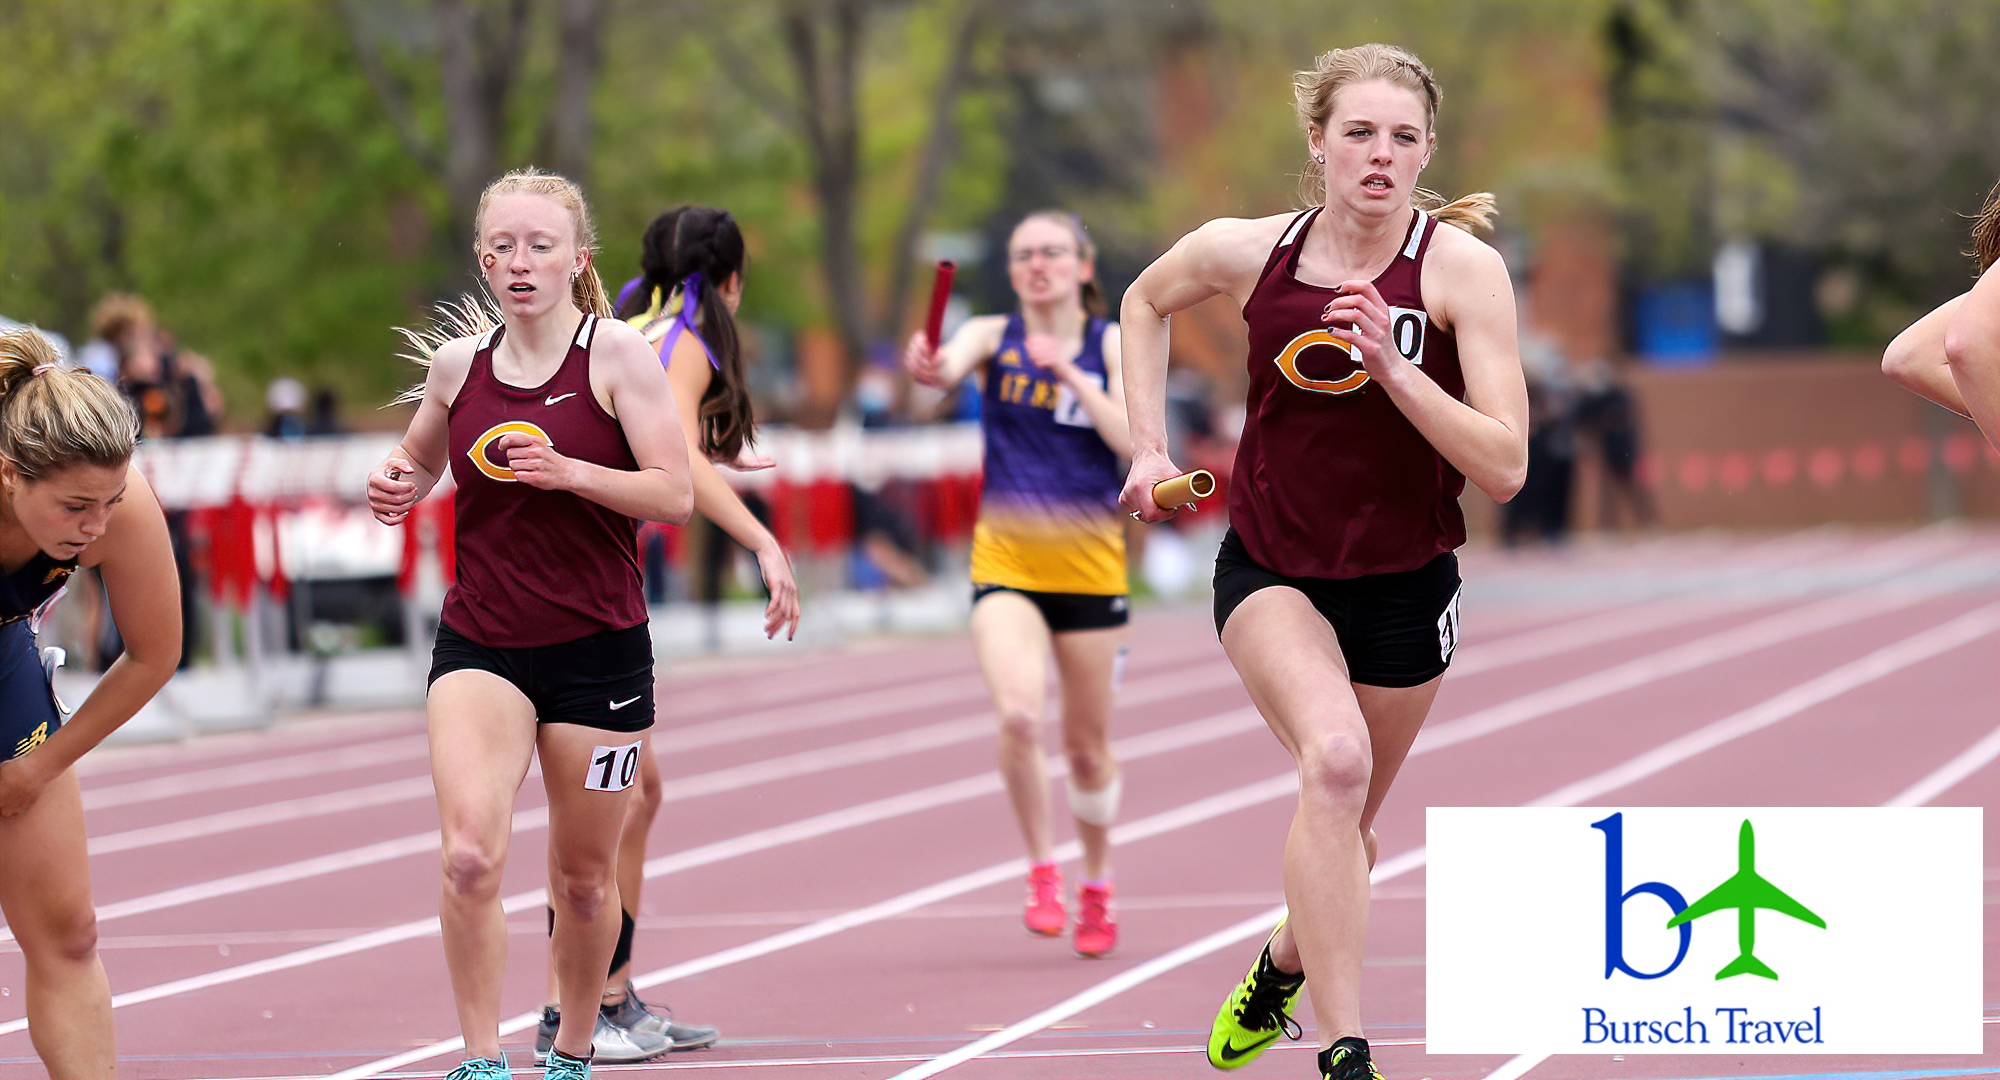 Freshman Maddie Guler (L) finishes the first leg of the 4x800-meter relay and passes the baton to Carly Fornshell. The CC team would go on to finish seventh in the race. (Photo courtesy of Nathan Lodermeier)